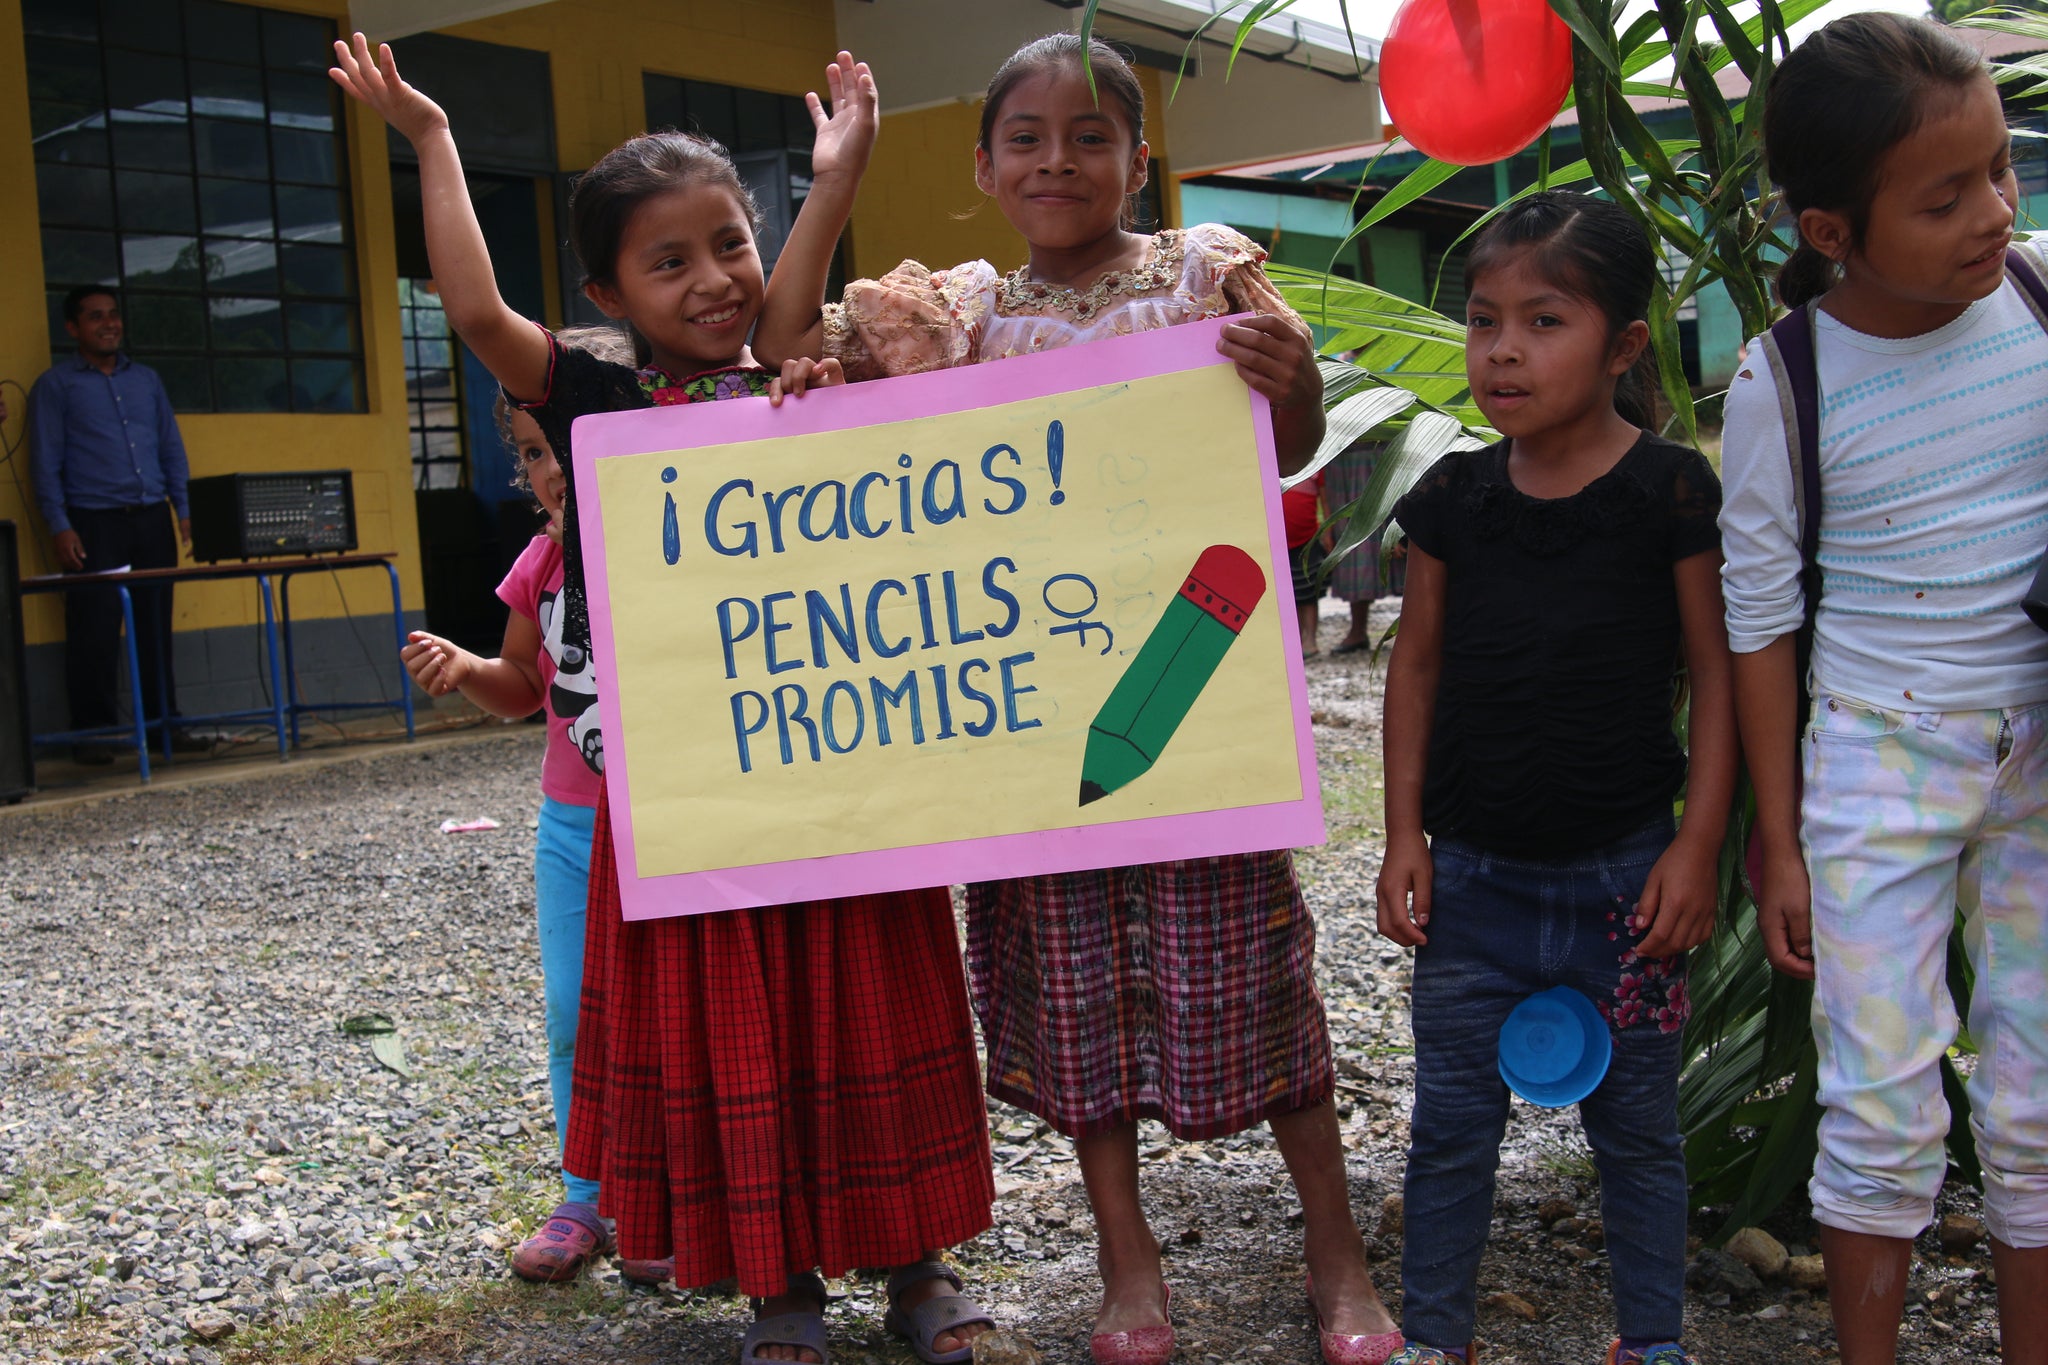 Students made signs to thank Pencils of Promise